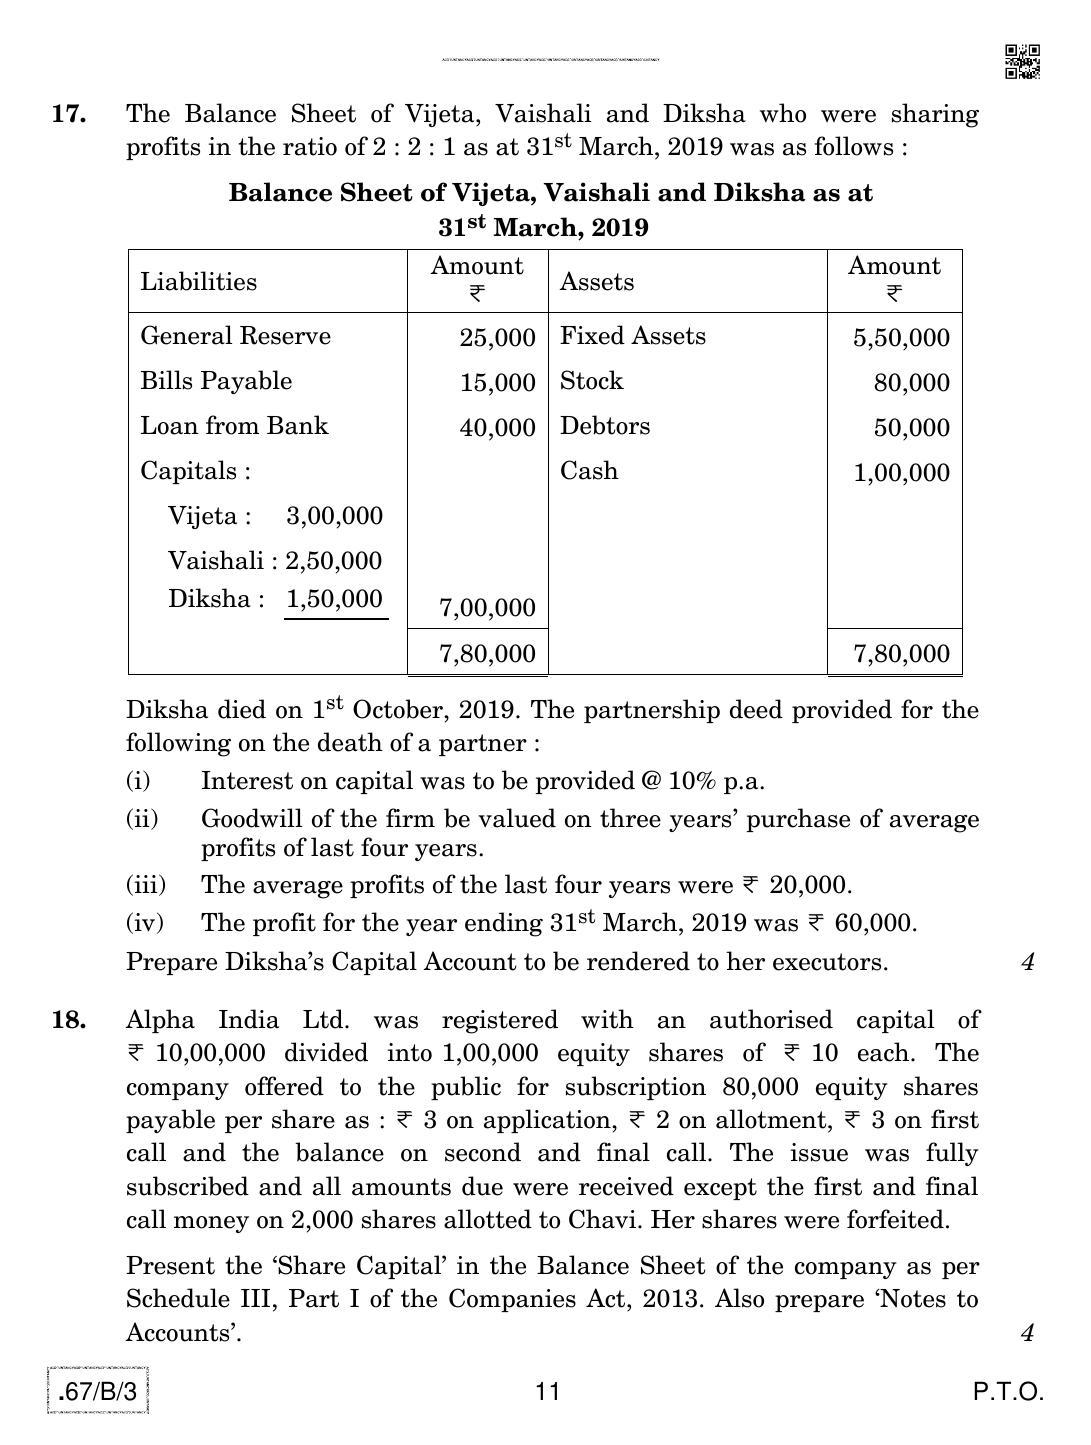 CBSE Class 12 67-C-3 - Accountancy 2020 Compartment Question Paper - Page 11